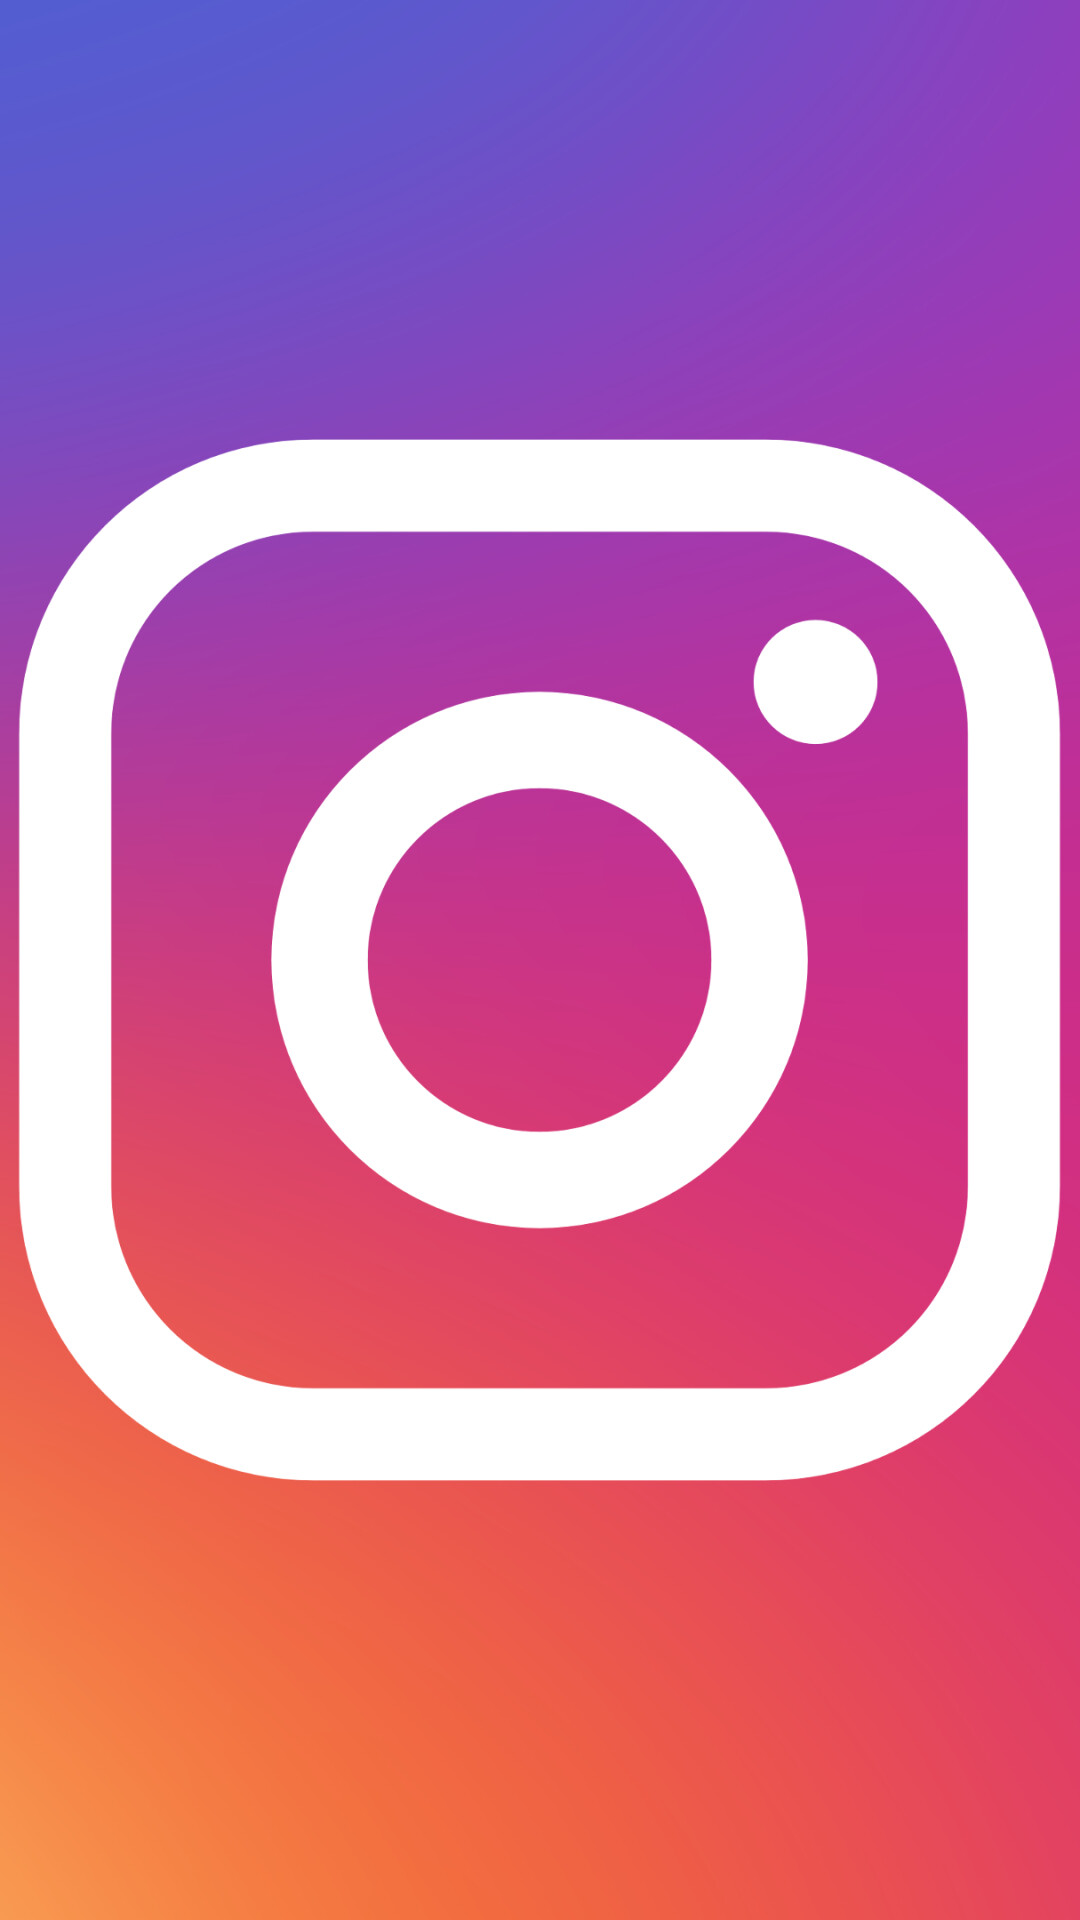 Instagram: A social networking app, Launched in 2010 by Kevin Systrom. 1080x1920 Full HD Background.